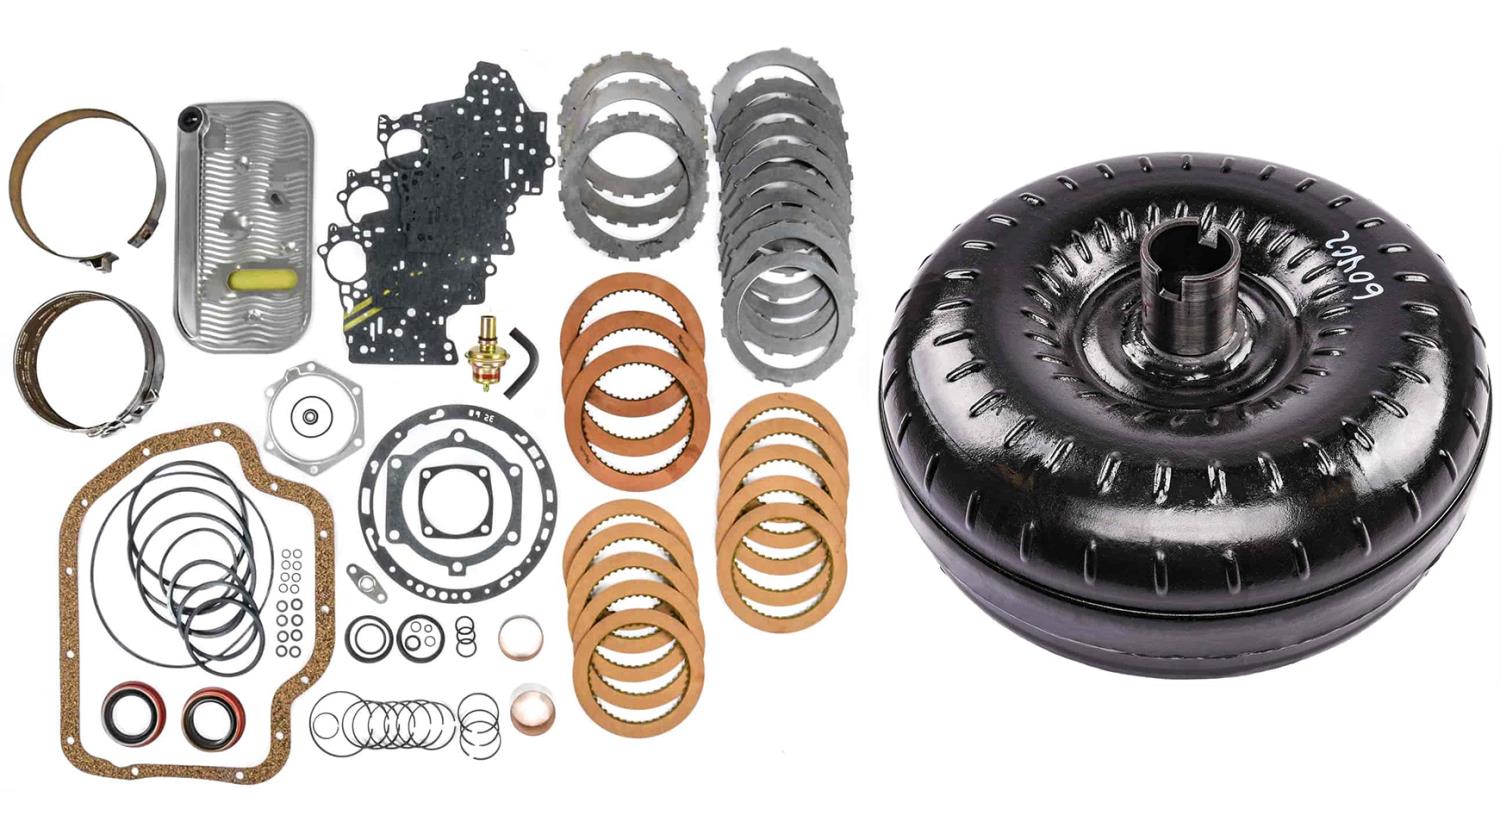 Automatic Transmission Rebuild Kit with Torque Converter for 1965-1987 GM TH400